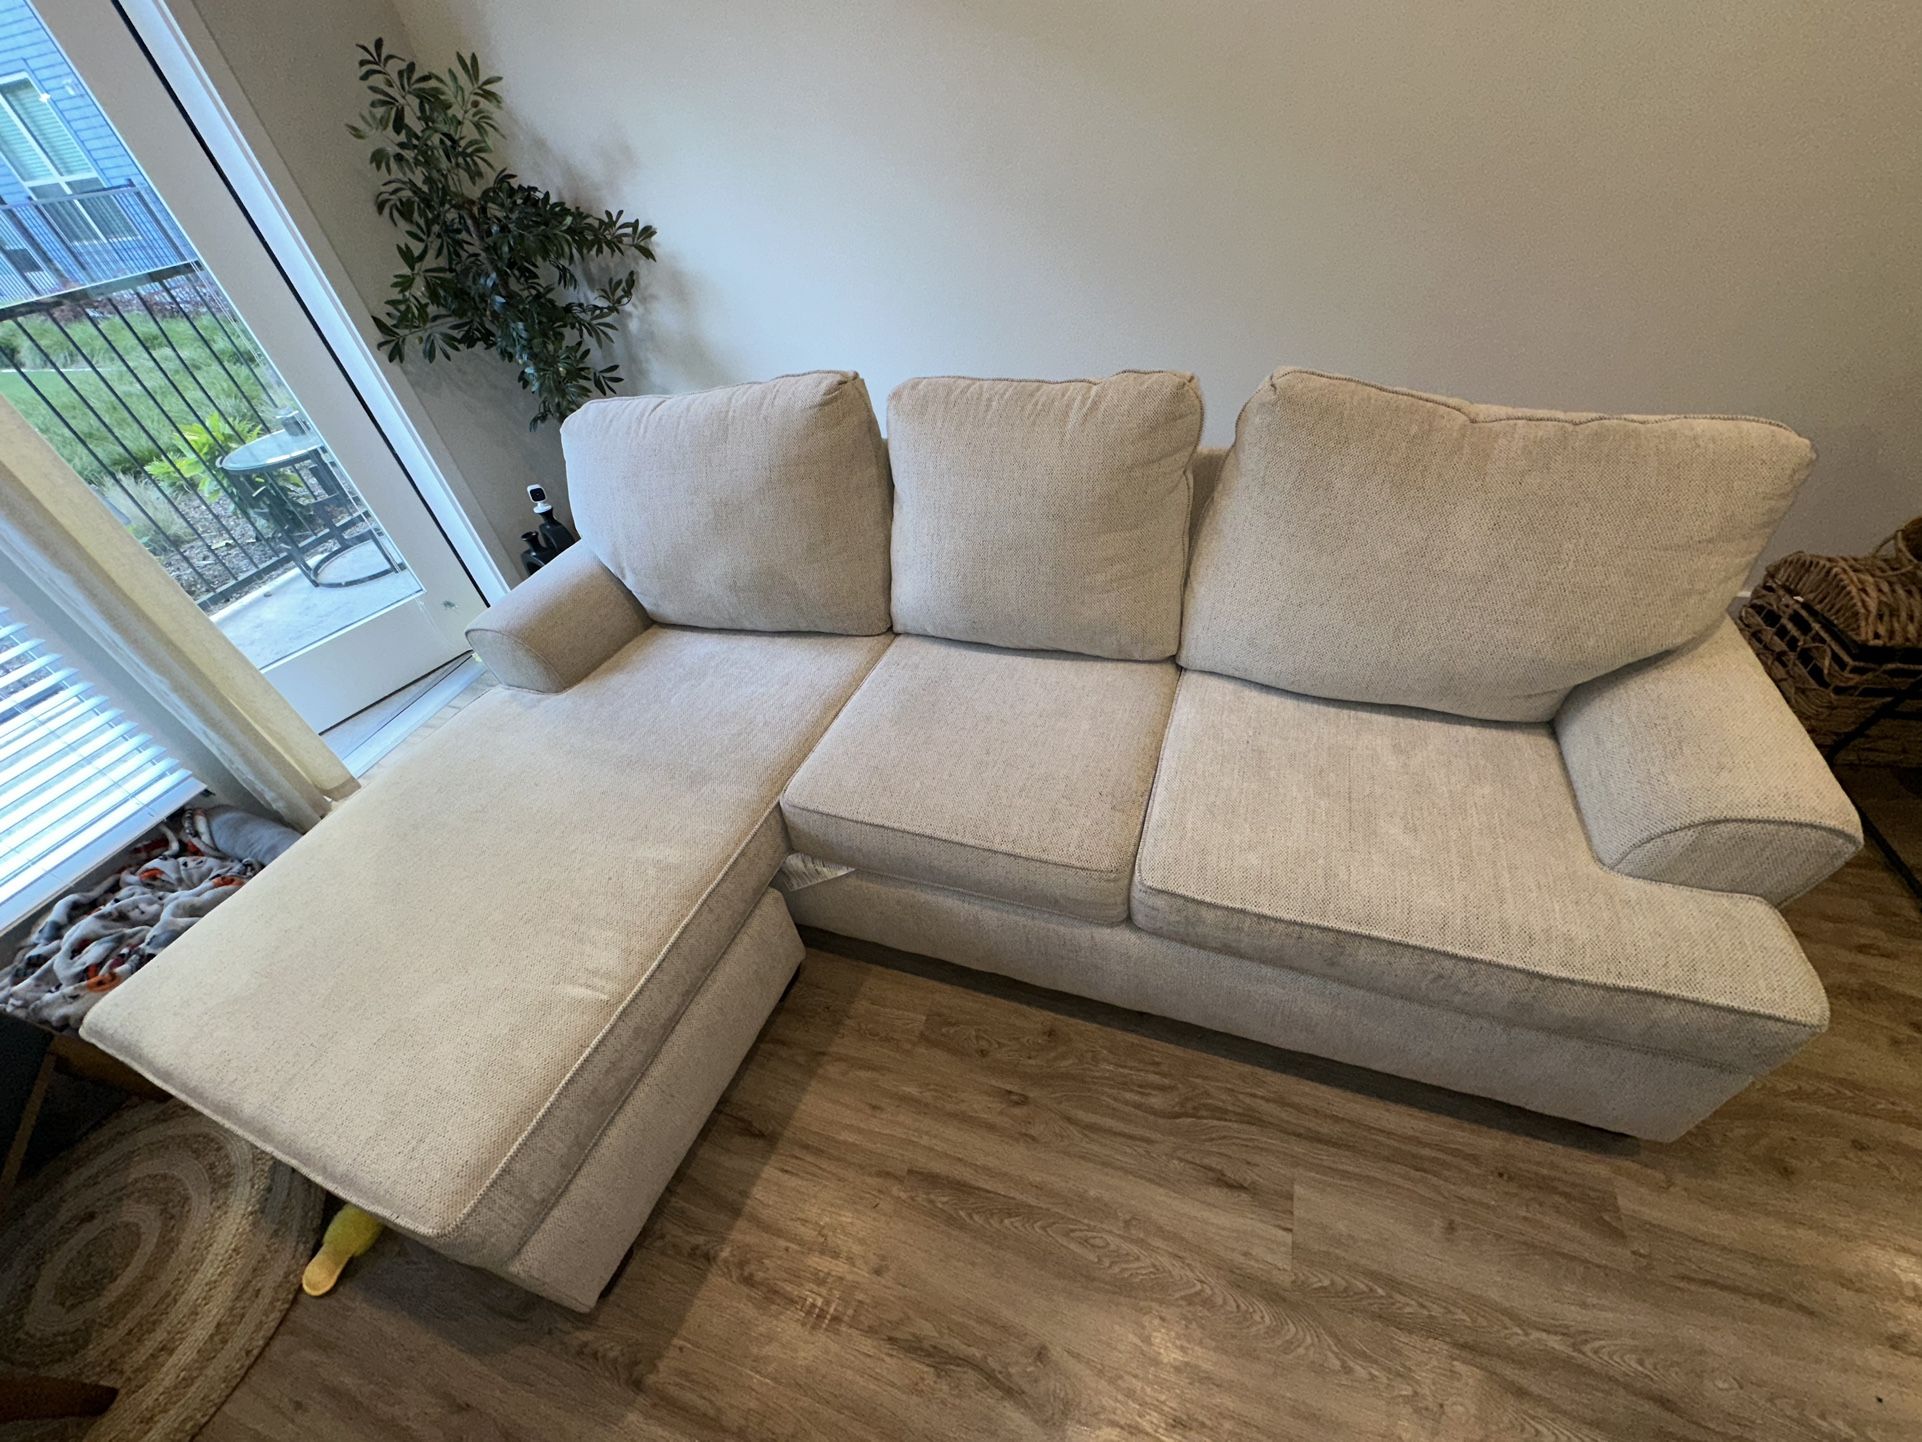 L Shape Couch Brand New Condition. 